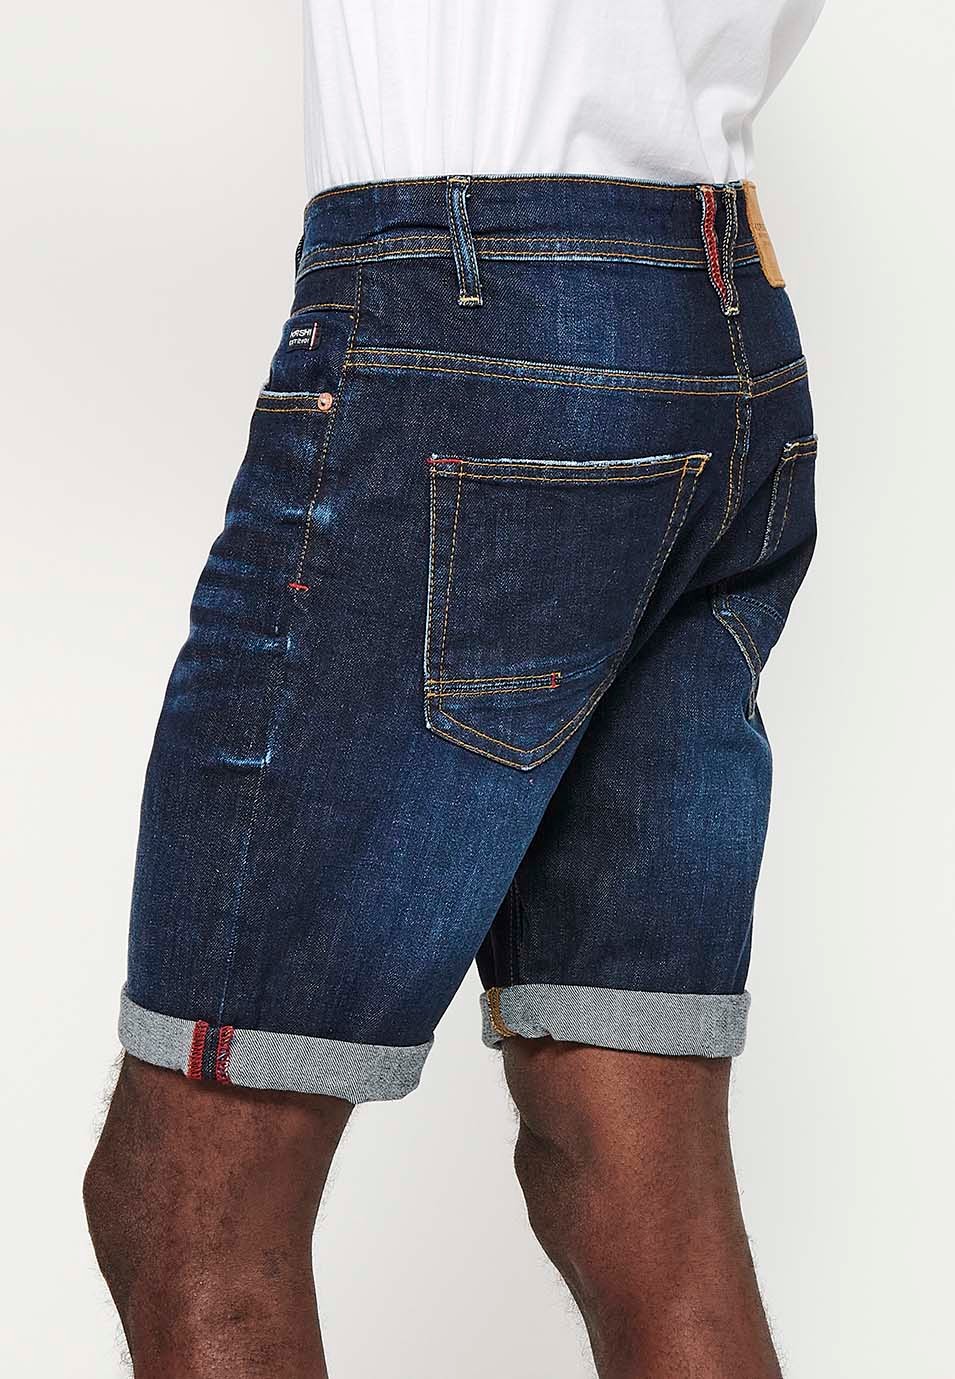 Shorts with turn-up finish and front zipper and button closure with five pockets, one blue pocket pocket for Men 1